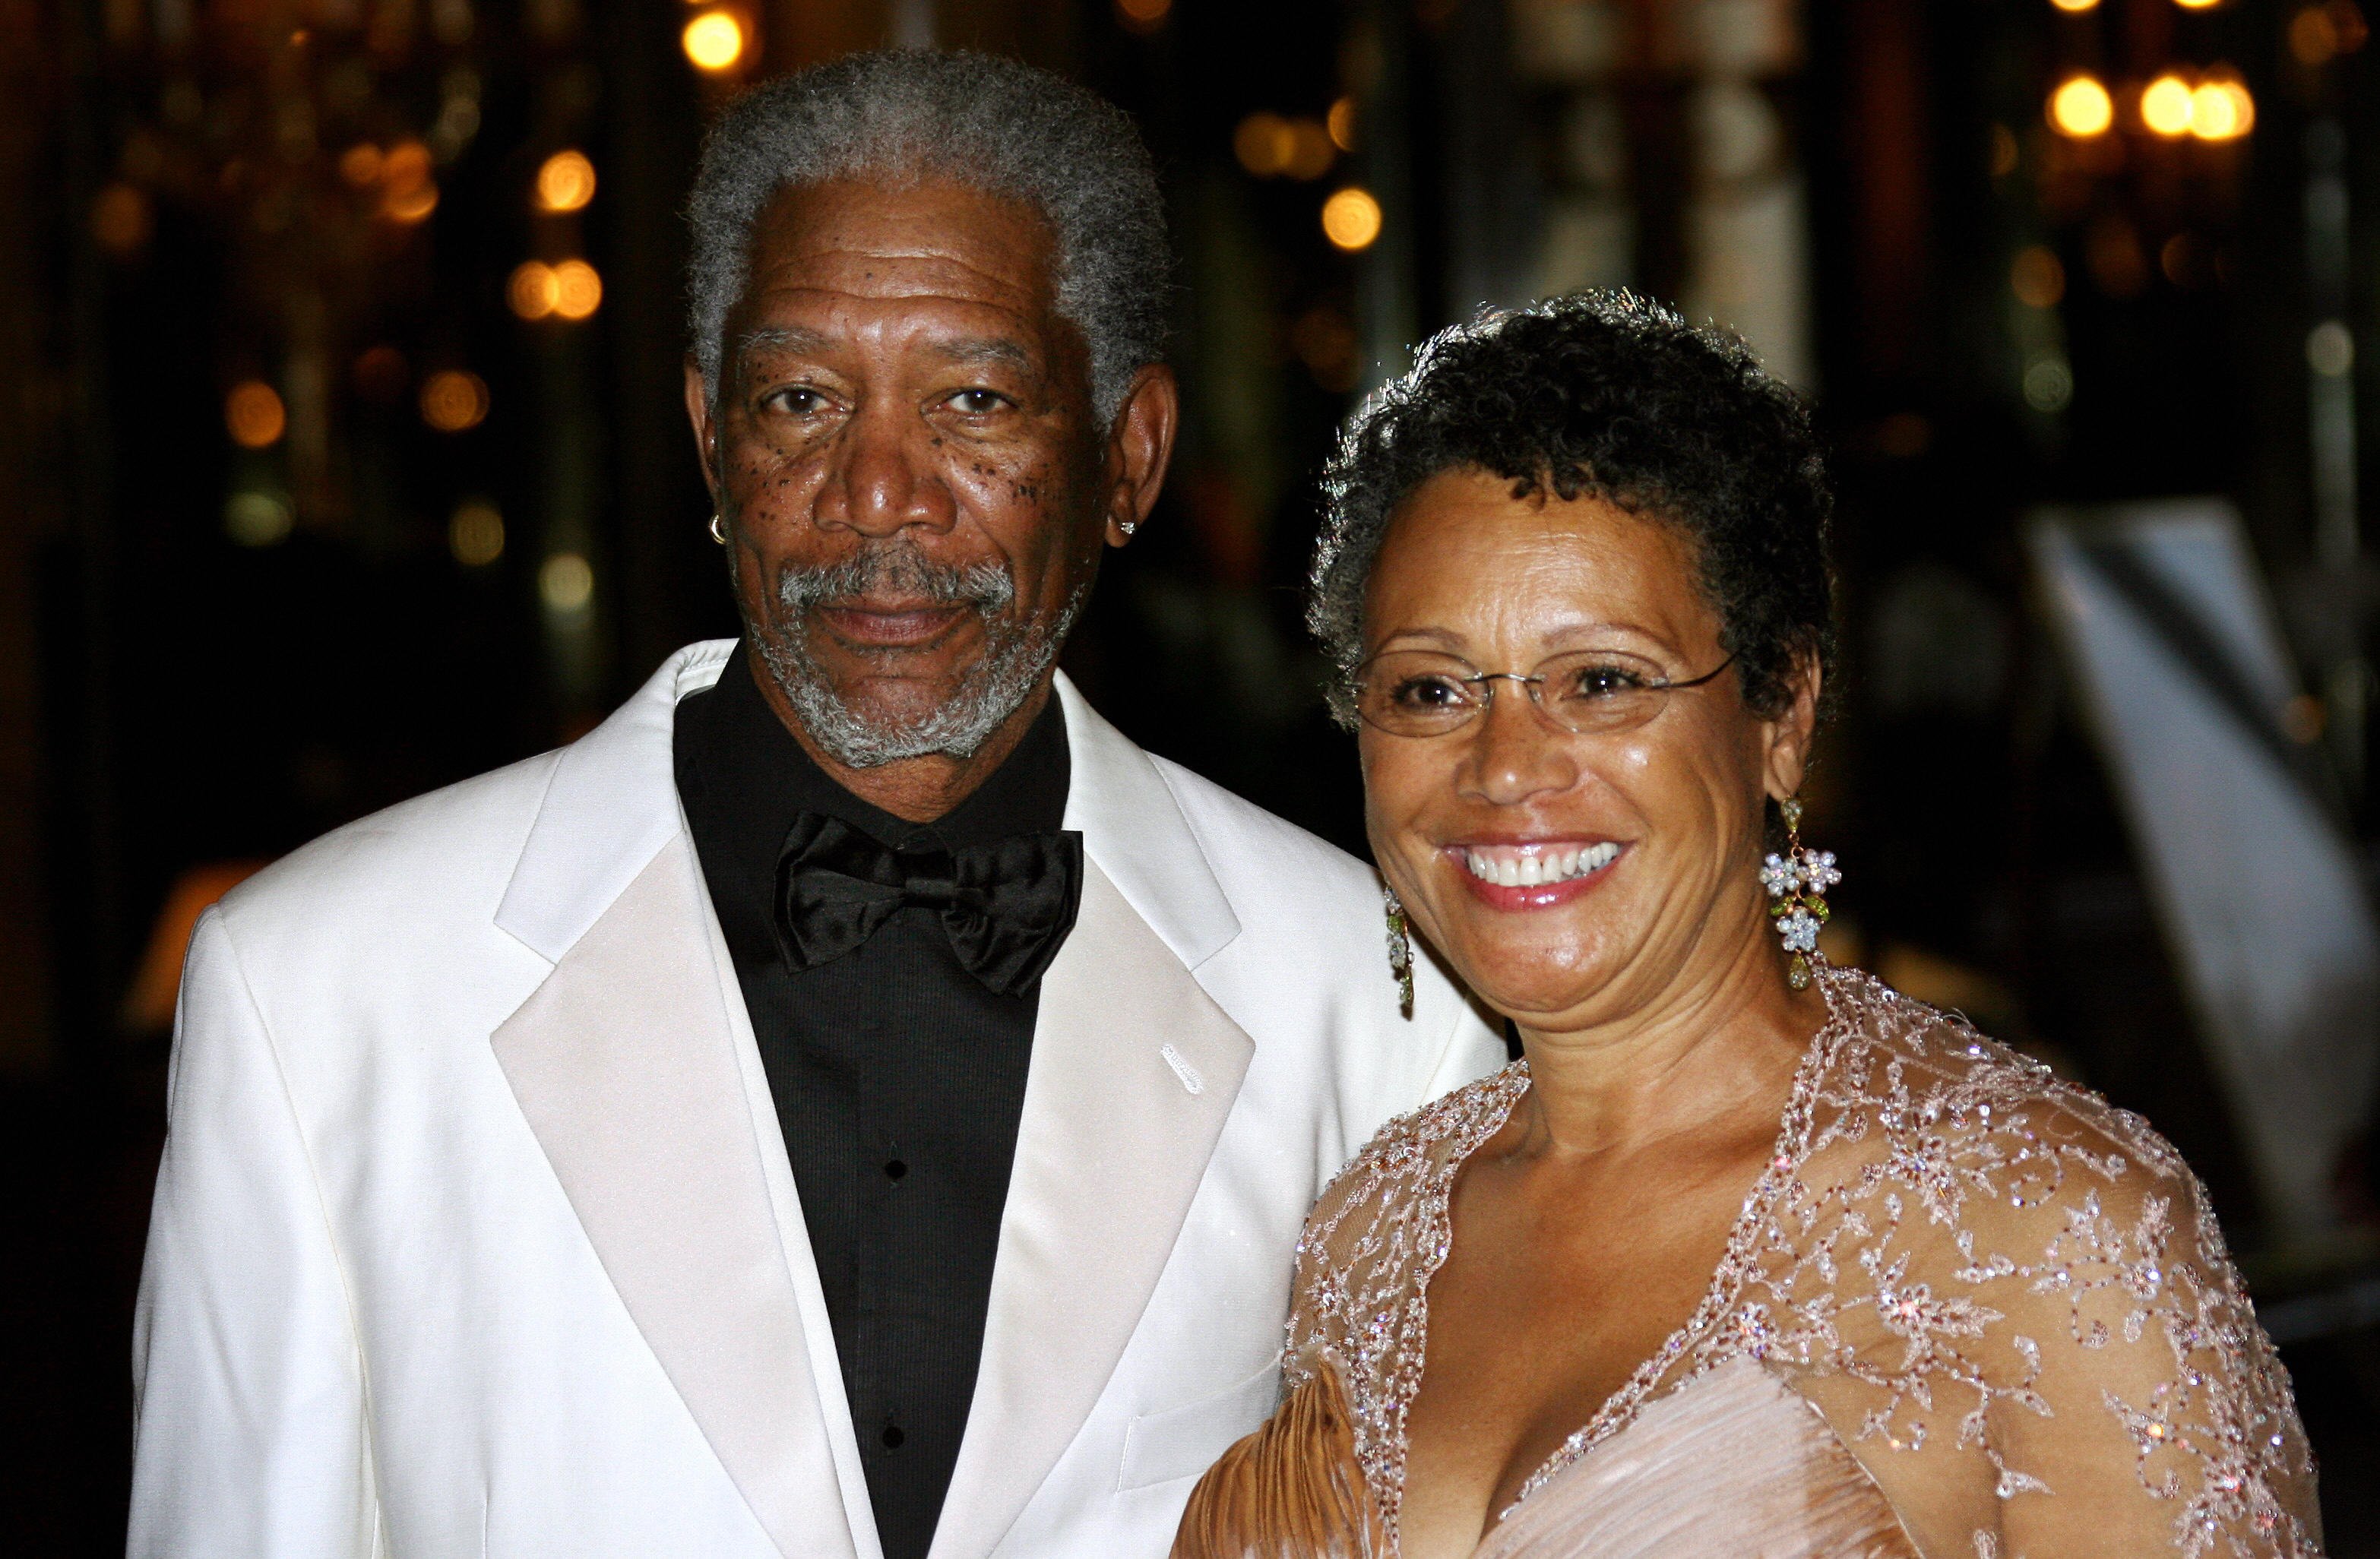 Morgan Freeman and Myrna Colley-Lee at the Hotel de Paris, 02 September 2007 in Monaco. I Source: Getty Images